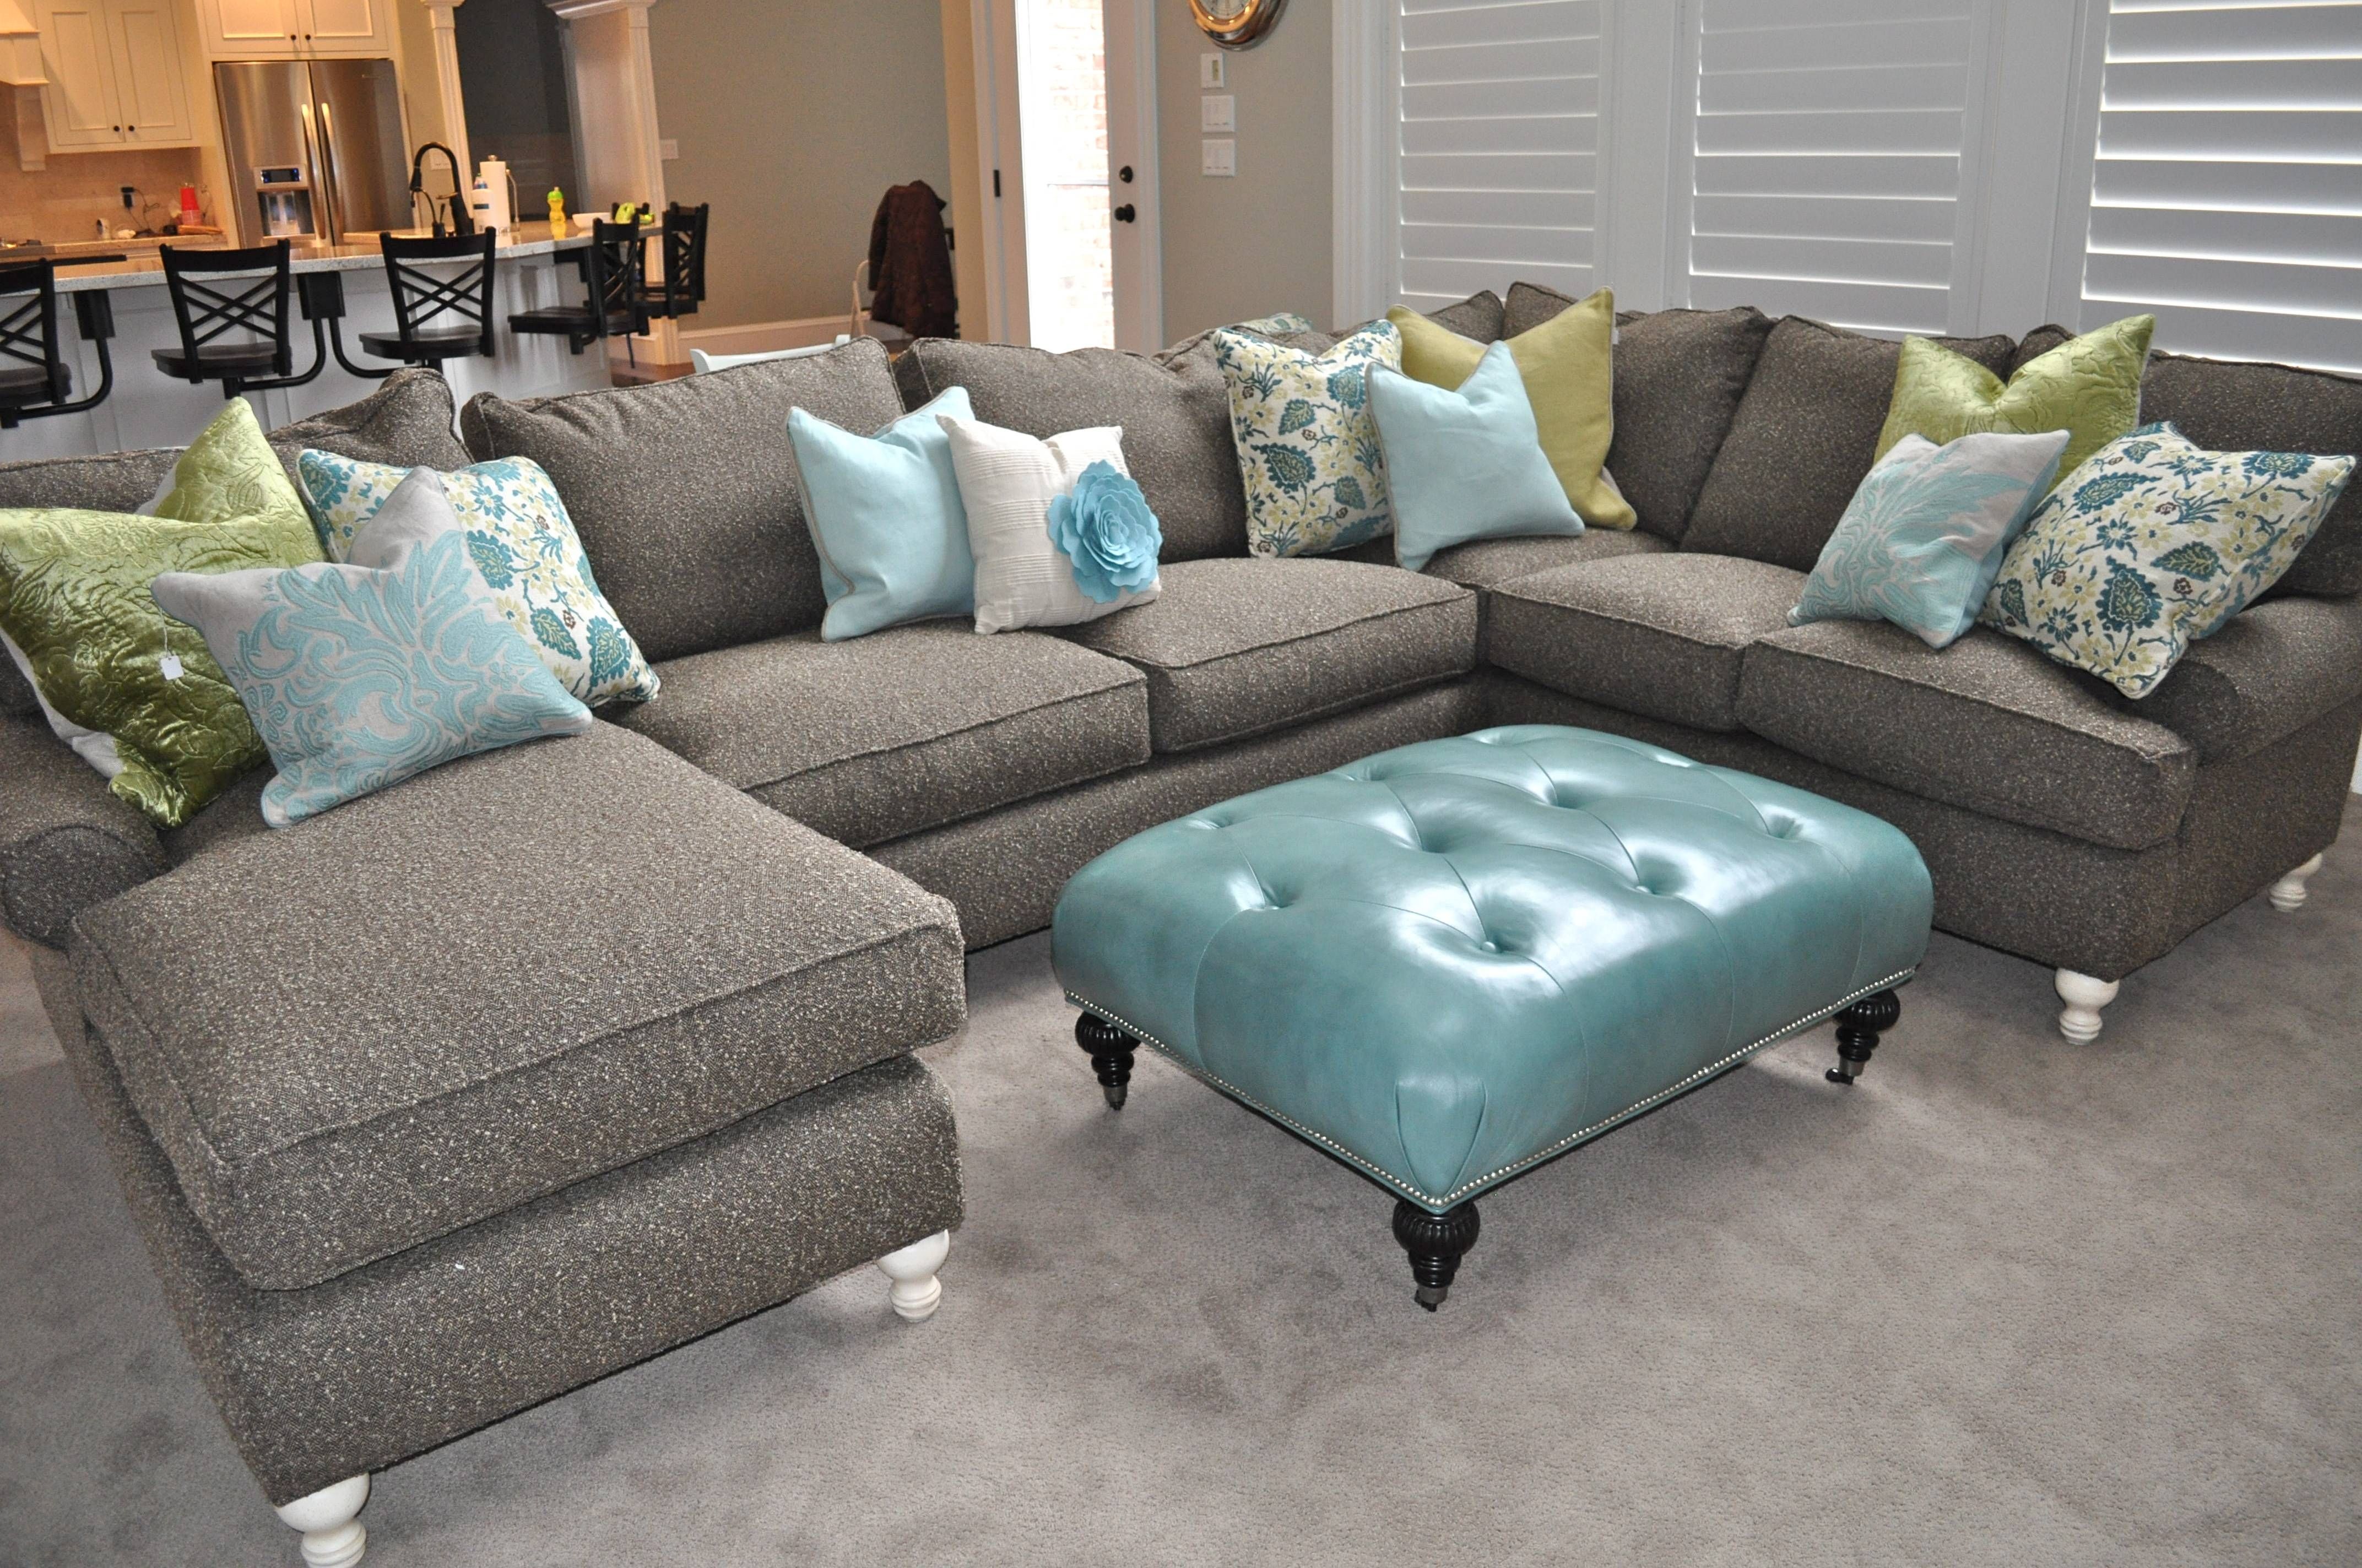 Beautiful Gray Tufted Sectional Sofa 55 About Remodel Down Feather Pertaining To Down Feather Sectional Sofa 